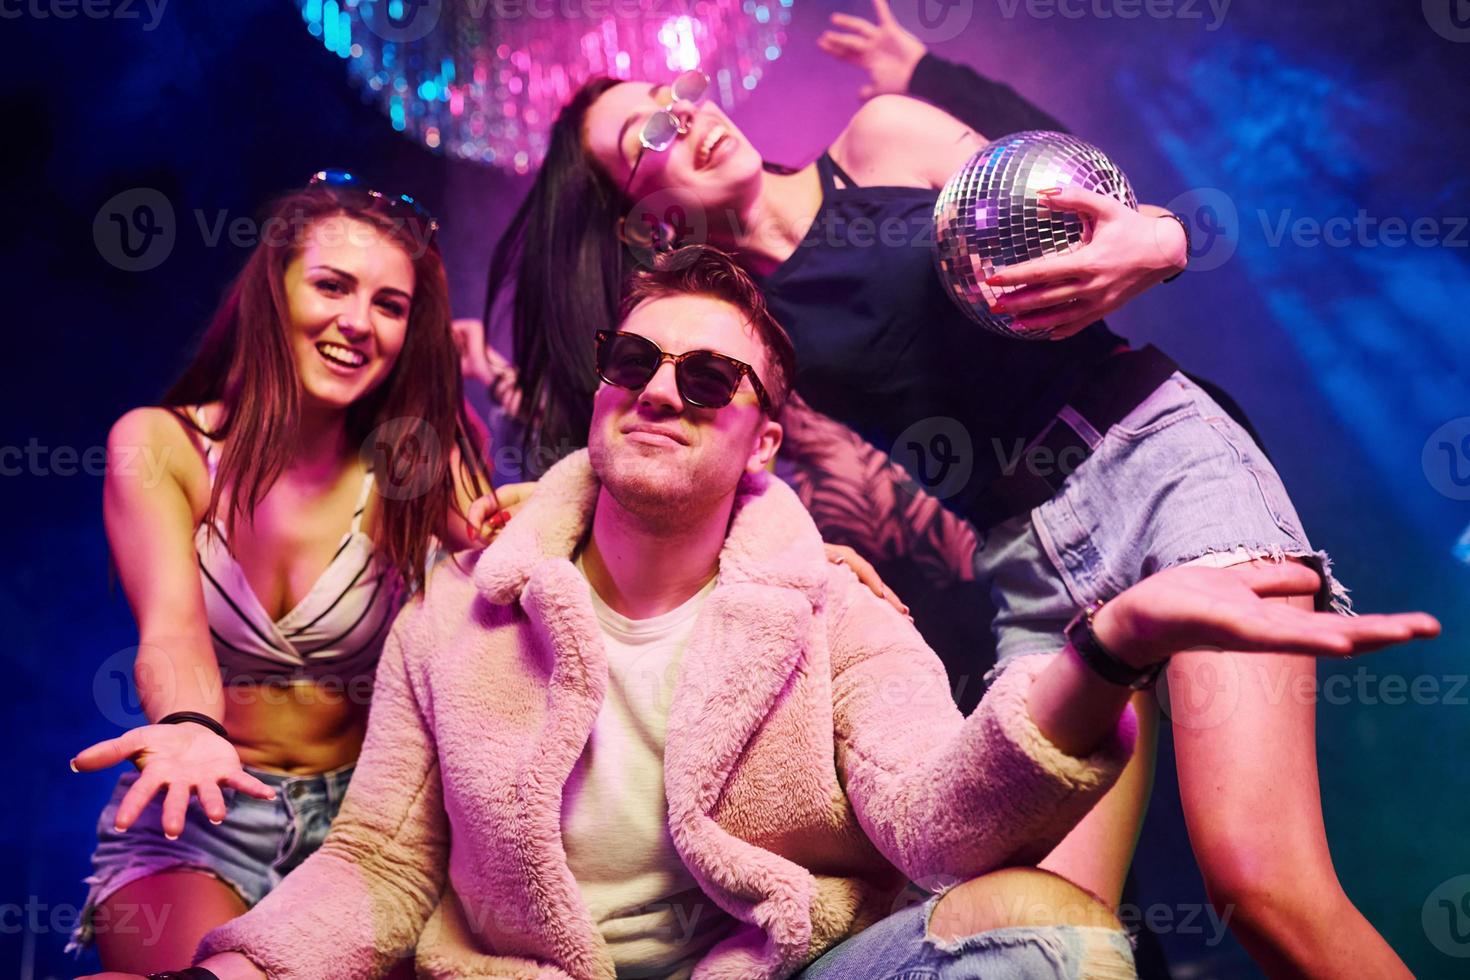 Elegant man in sunglasses in the midle feels like a boss. Young people is having fun in night club with colorful laser lights photo